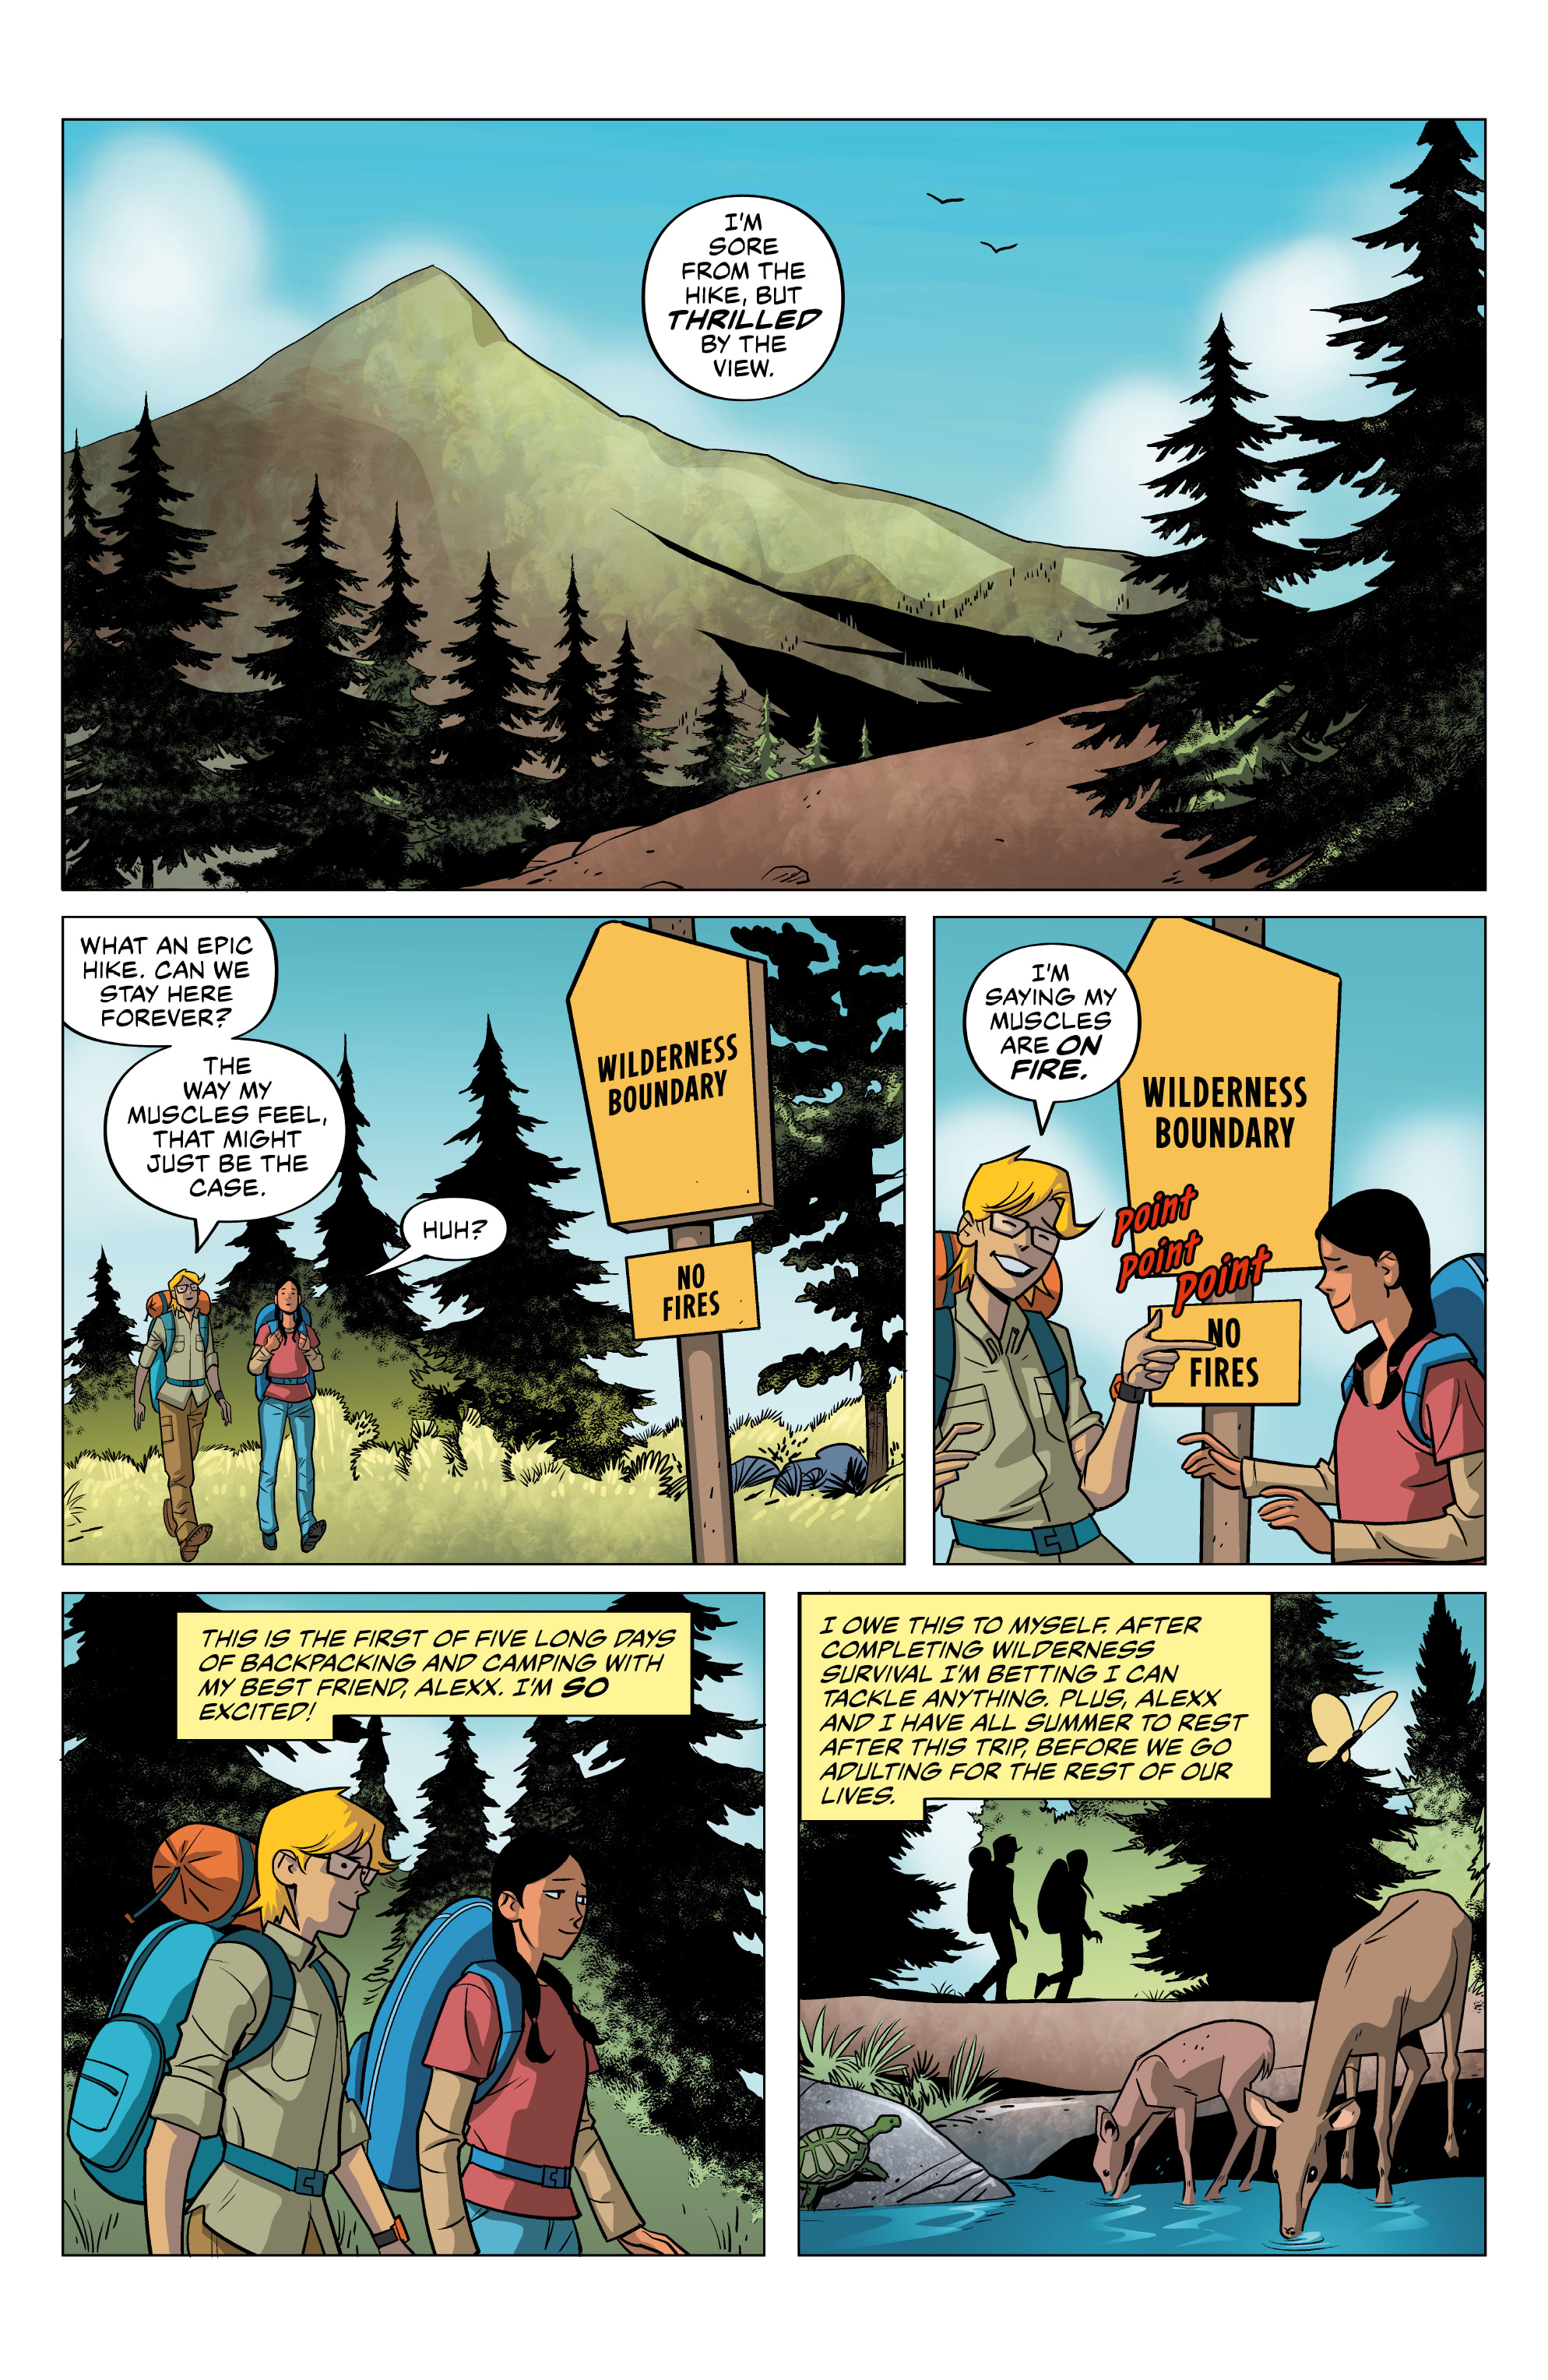 Without Warning! Wildfire Safety (2021): Chapter 1 - Page 3